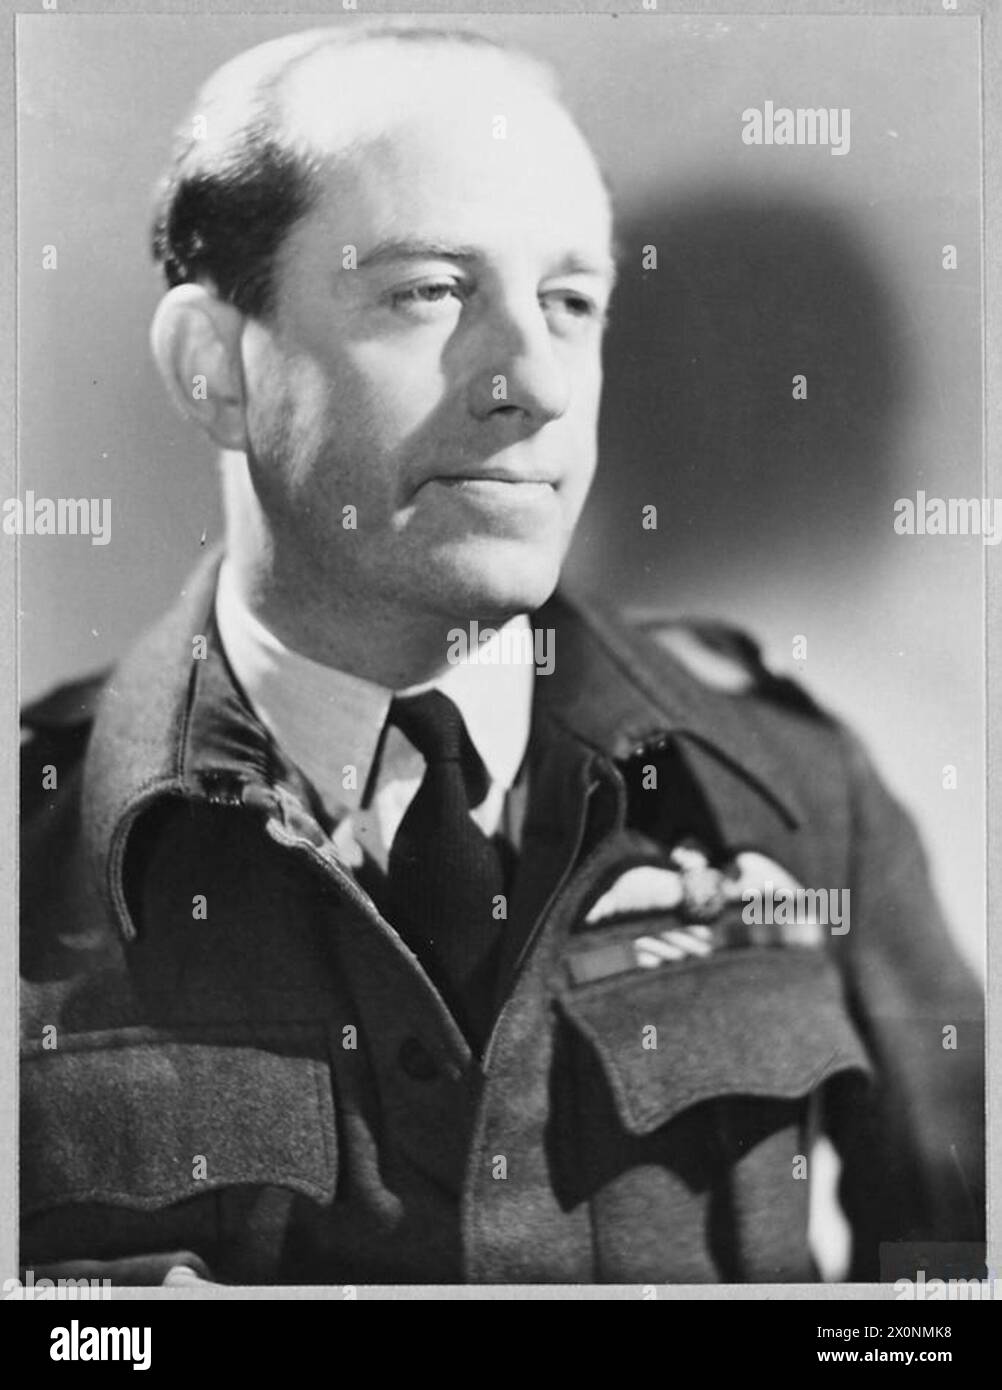 AIR COMMODORE D.L. THOMSON, DSO., DFC. - Air Commodore DONALD LESLIE THOMSON, DSO., DFC., a Base Commander in R.A.F. Bomber Command, was born in India in 1903 and educated at Dulwich College. He was a cadet at the R.A.F. College, Cranwell. In October 1942 he was awarded the D.F.C. for his work in bombing attacks. The citation to the D.S.O. awarded in September 1944 stated that he had taken part in attacks against some of the most heavily defended German targets. 'He has displayed excellent qualities of leadership, and his perfect example of coolness and cheerful courage has been an inspiration Stock Photo